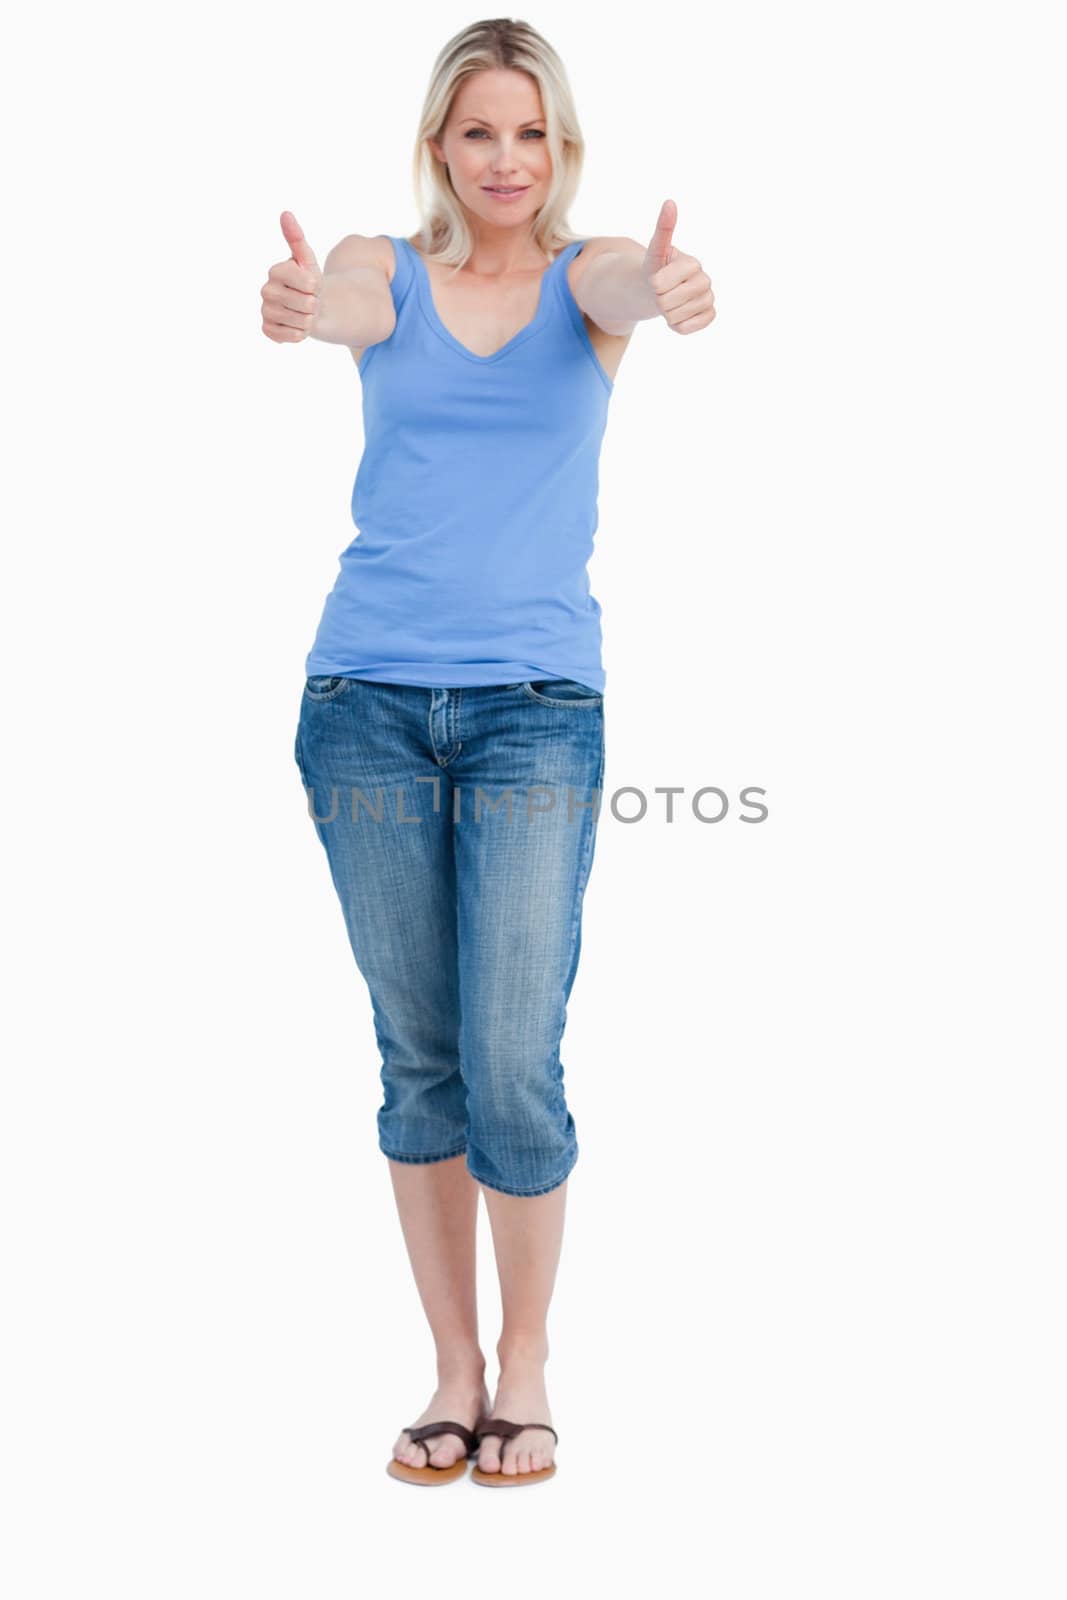 Blonde woman standing upright with her thumbs up against a white background